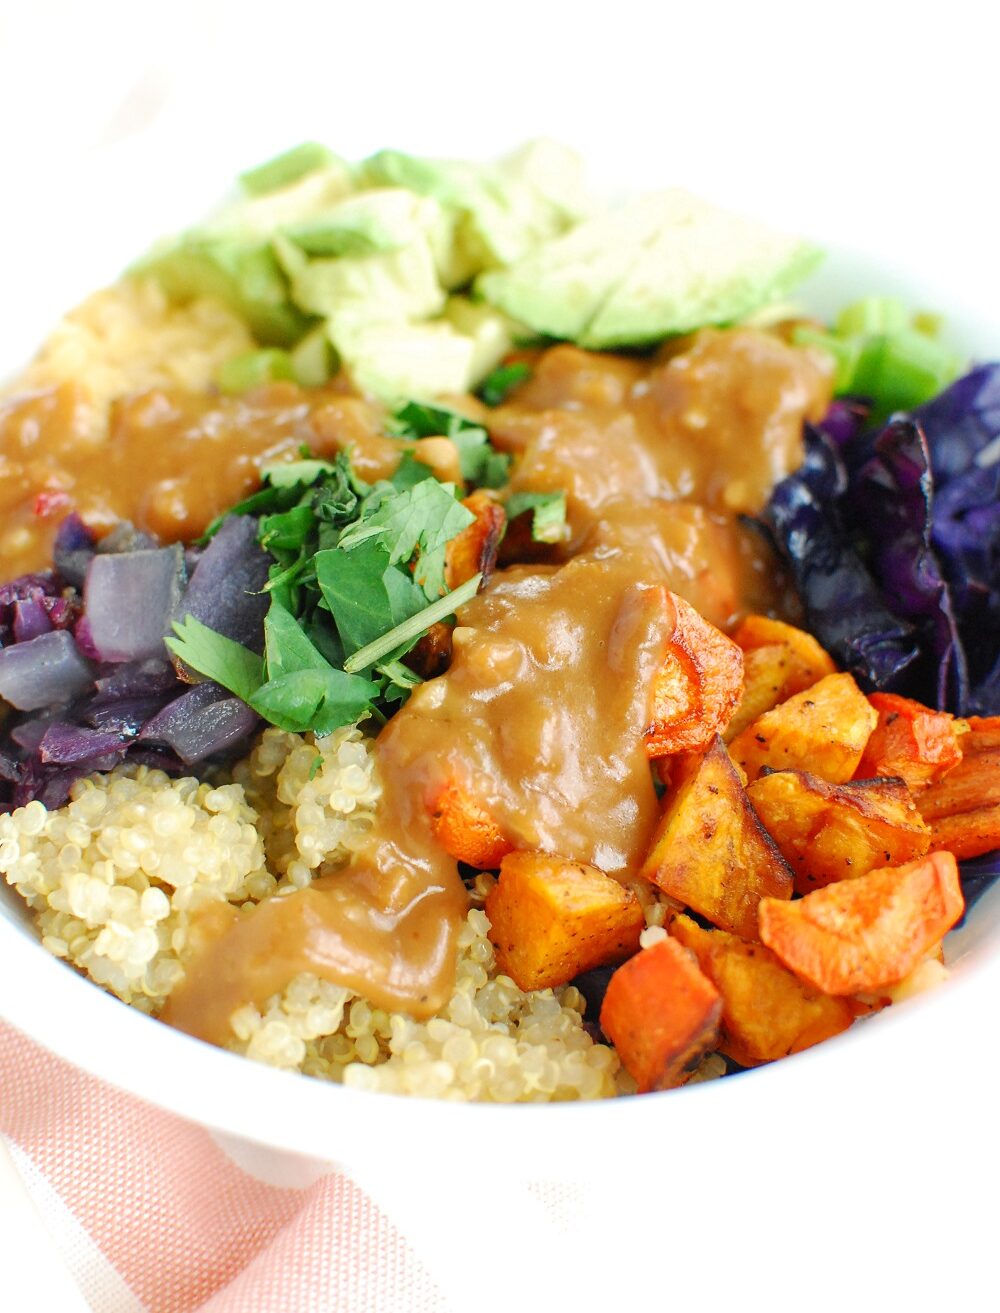 A white bowl filled with quinoa, lentils, carrots, sweet potatoes, cilantro, cabbage, onion, and avocado, topped with peanut sauce.